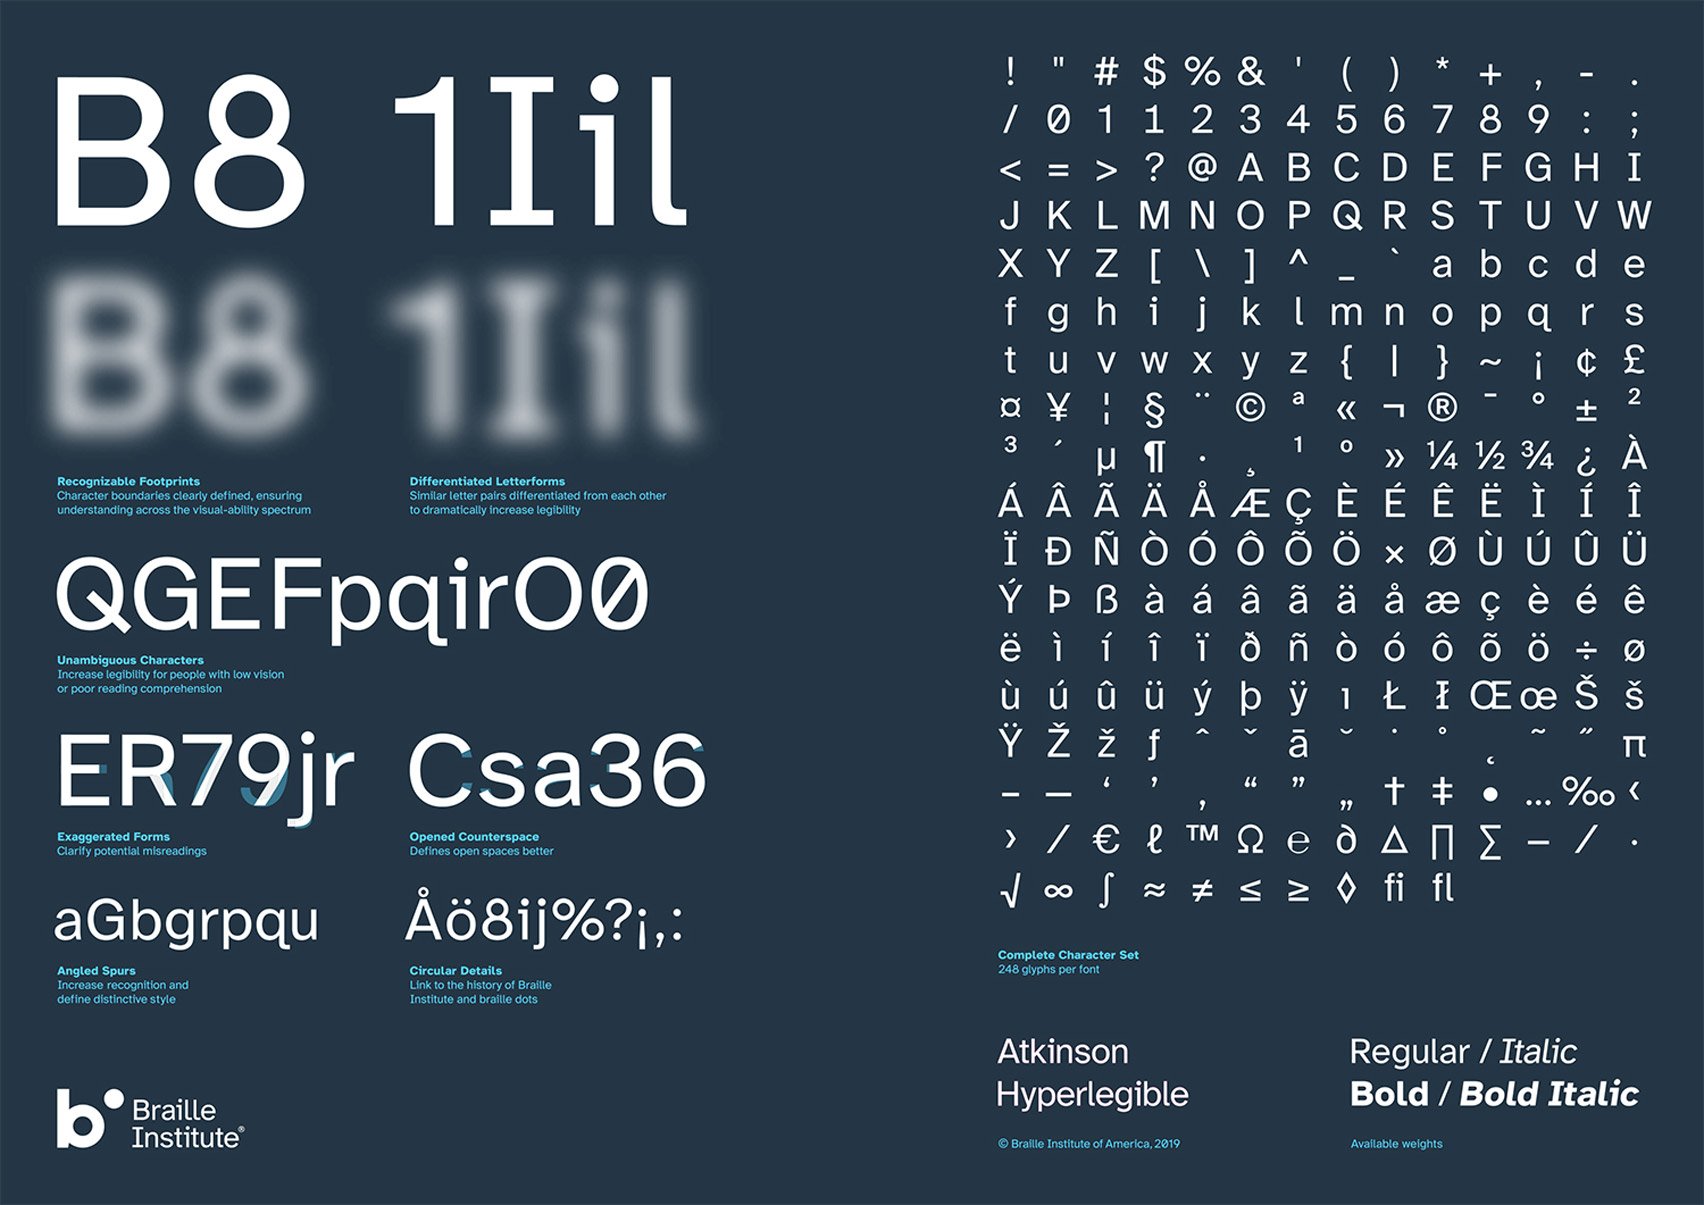 Decmyk Atkinson Hyperlegible Typeface Is Designed For Visually Impaired Readers